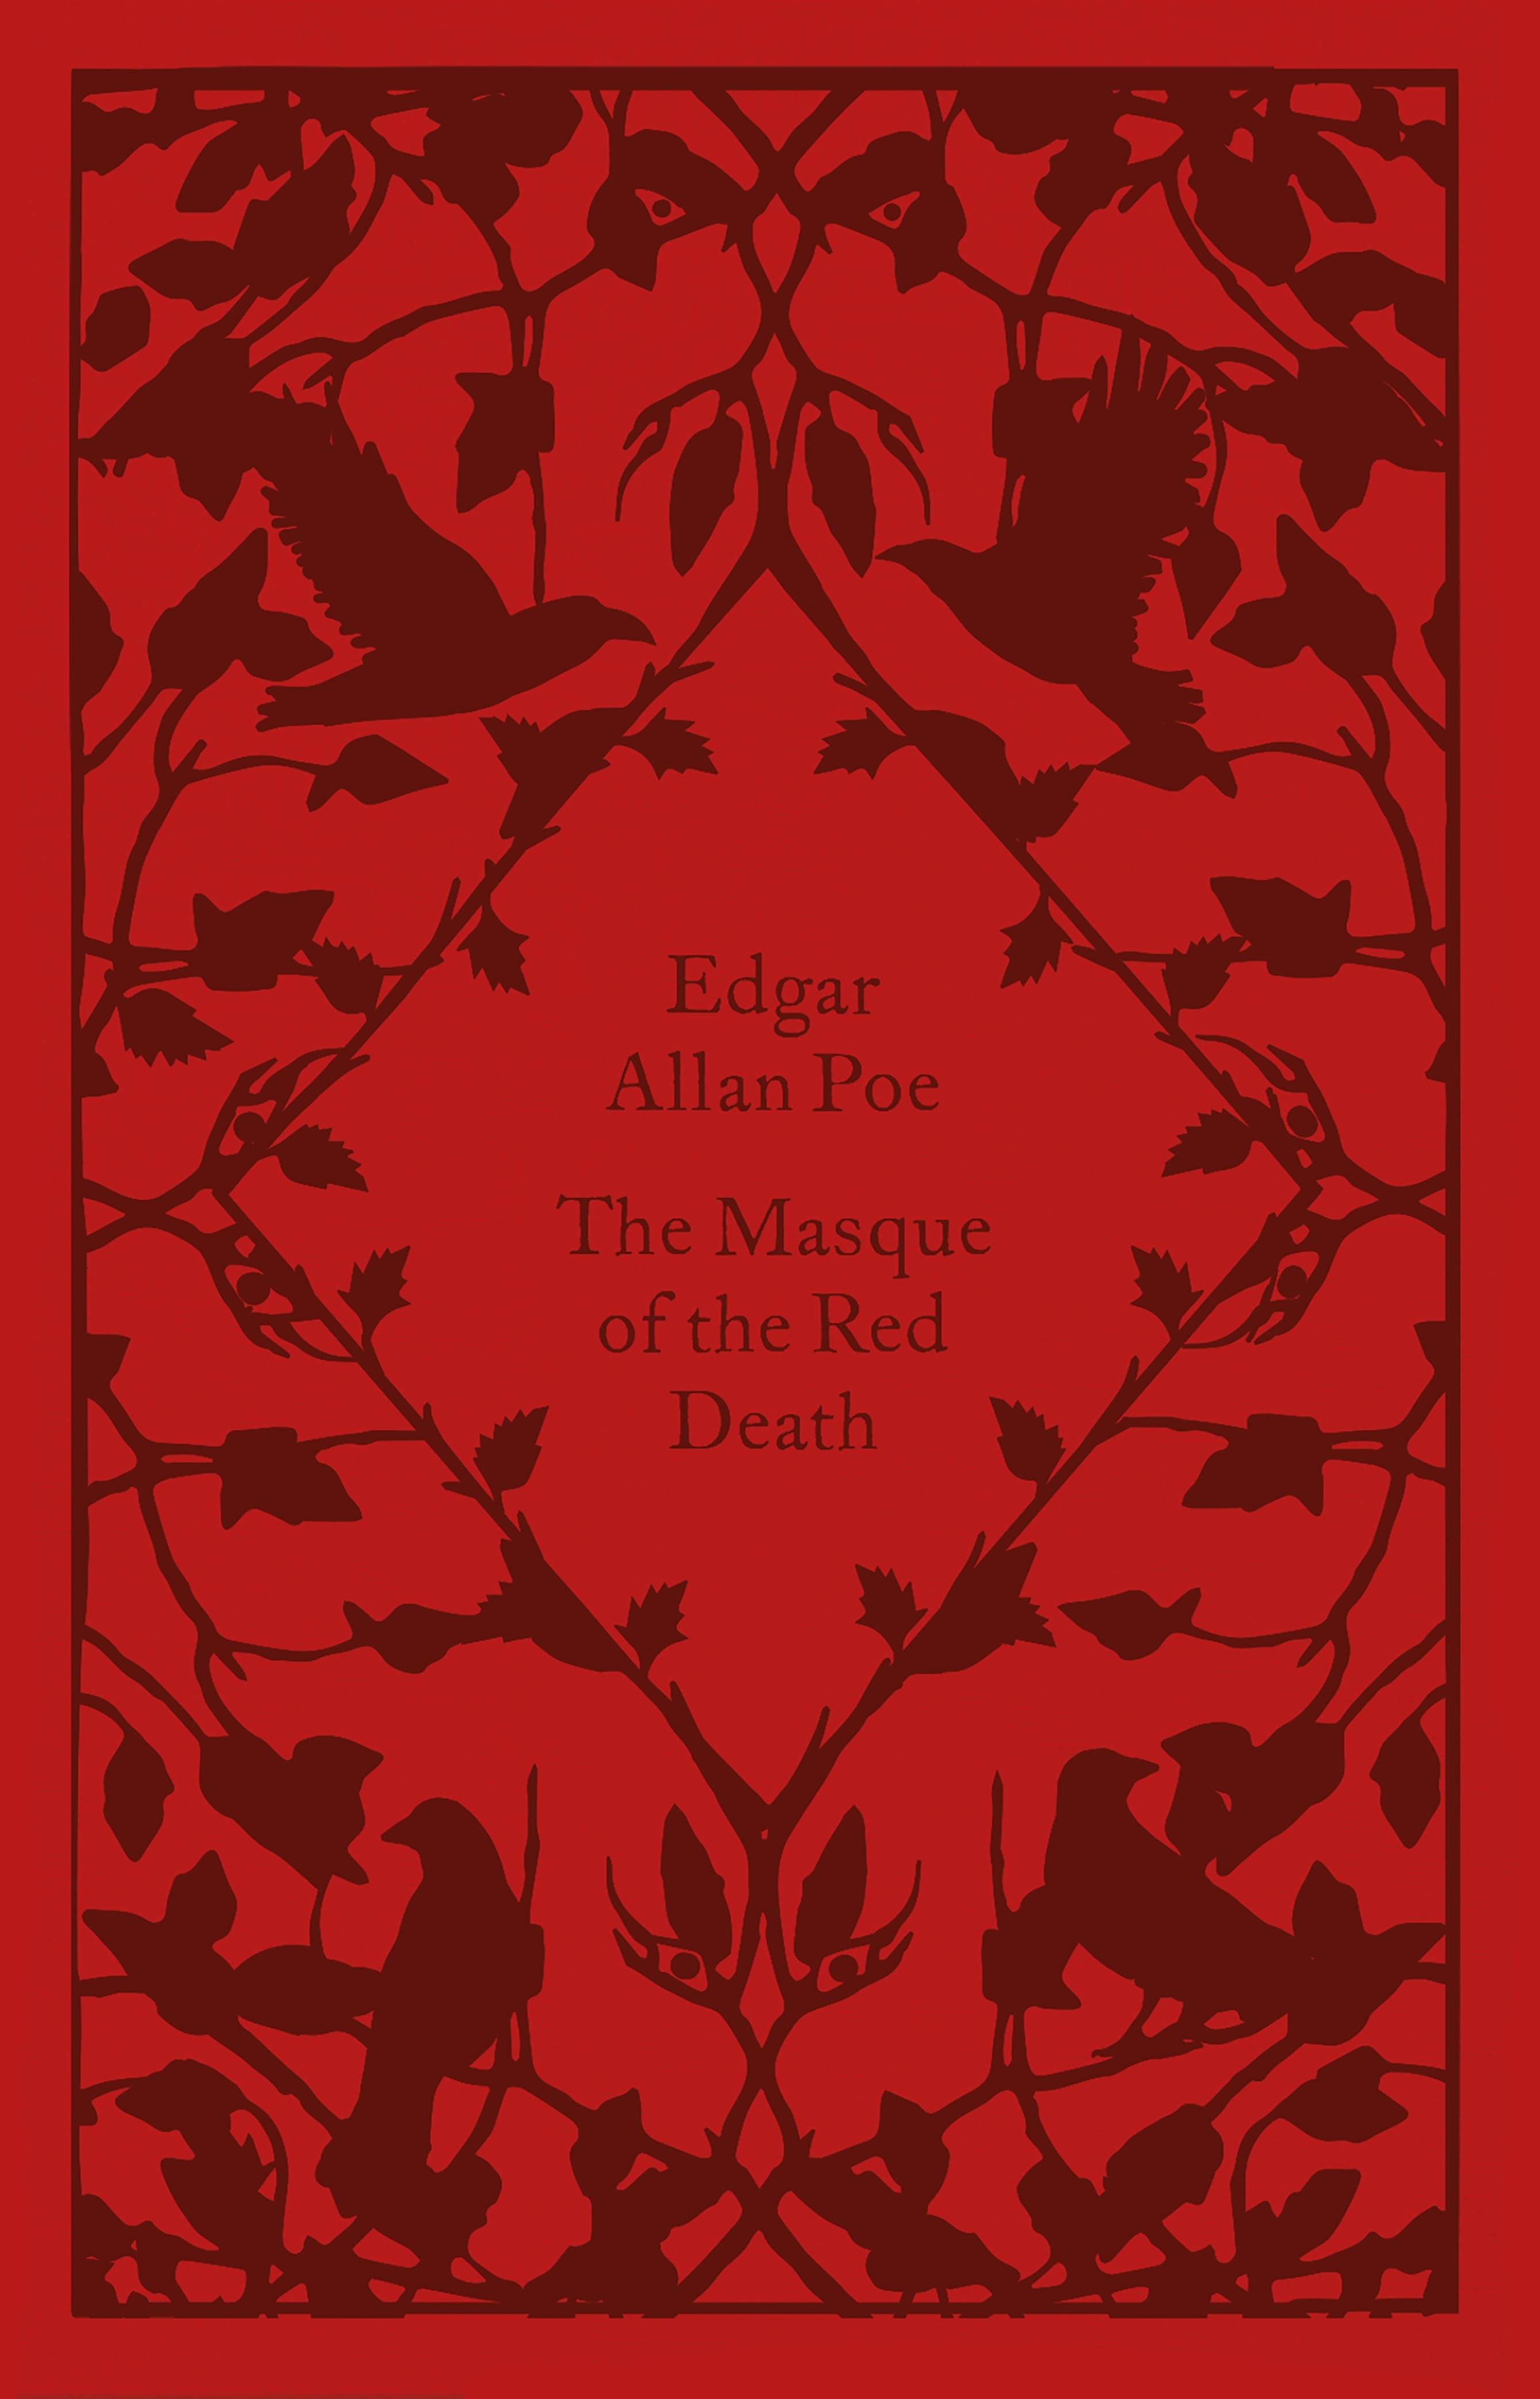 Book “The Masque of the Red Death” by Edgar Allan Poe — August 25, 2022